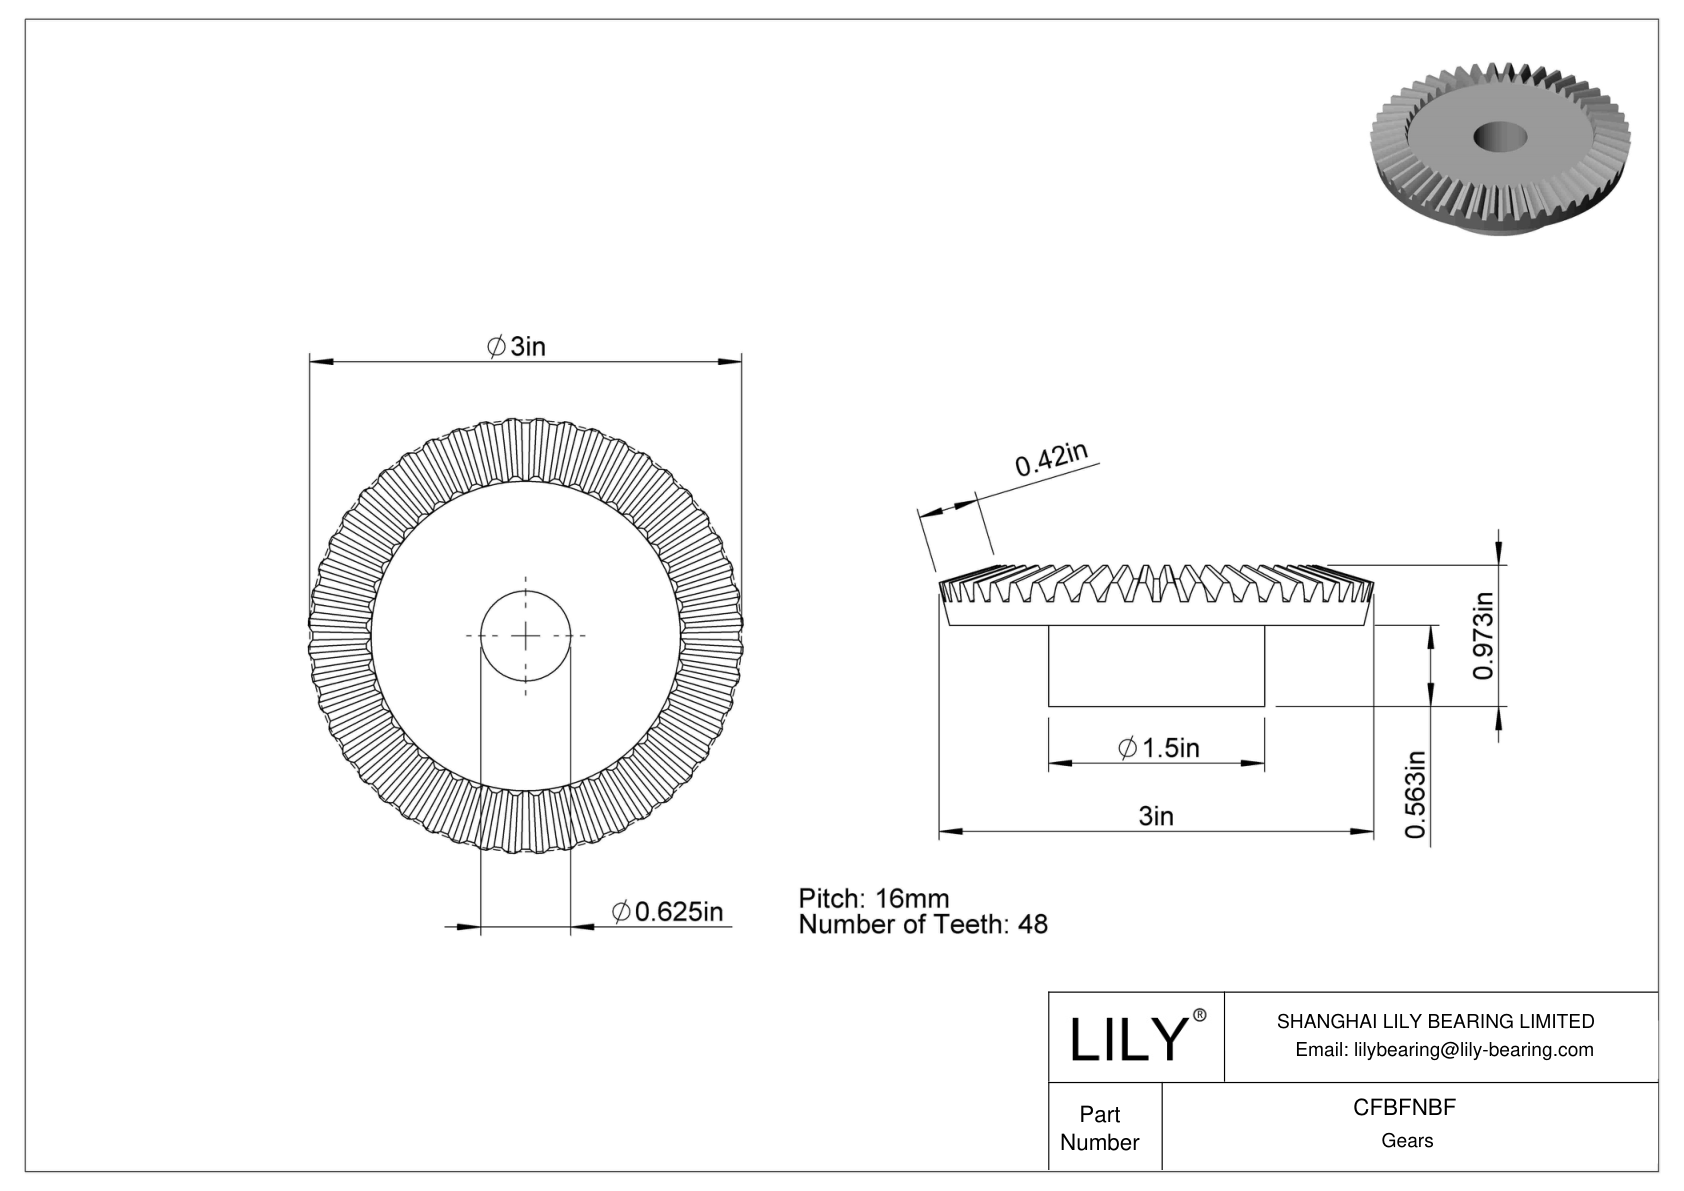 CFBFNBF Inch Gears cad drawing